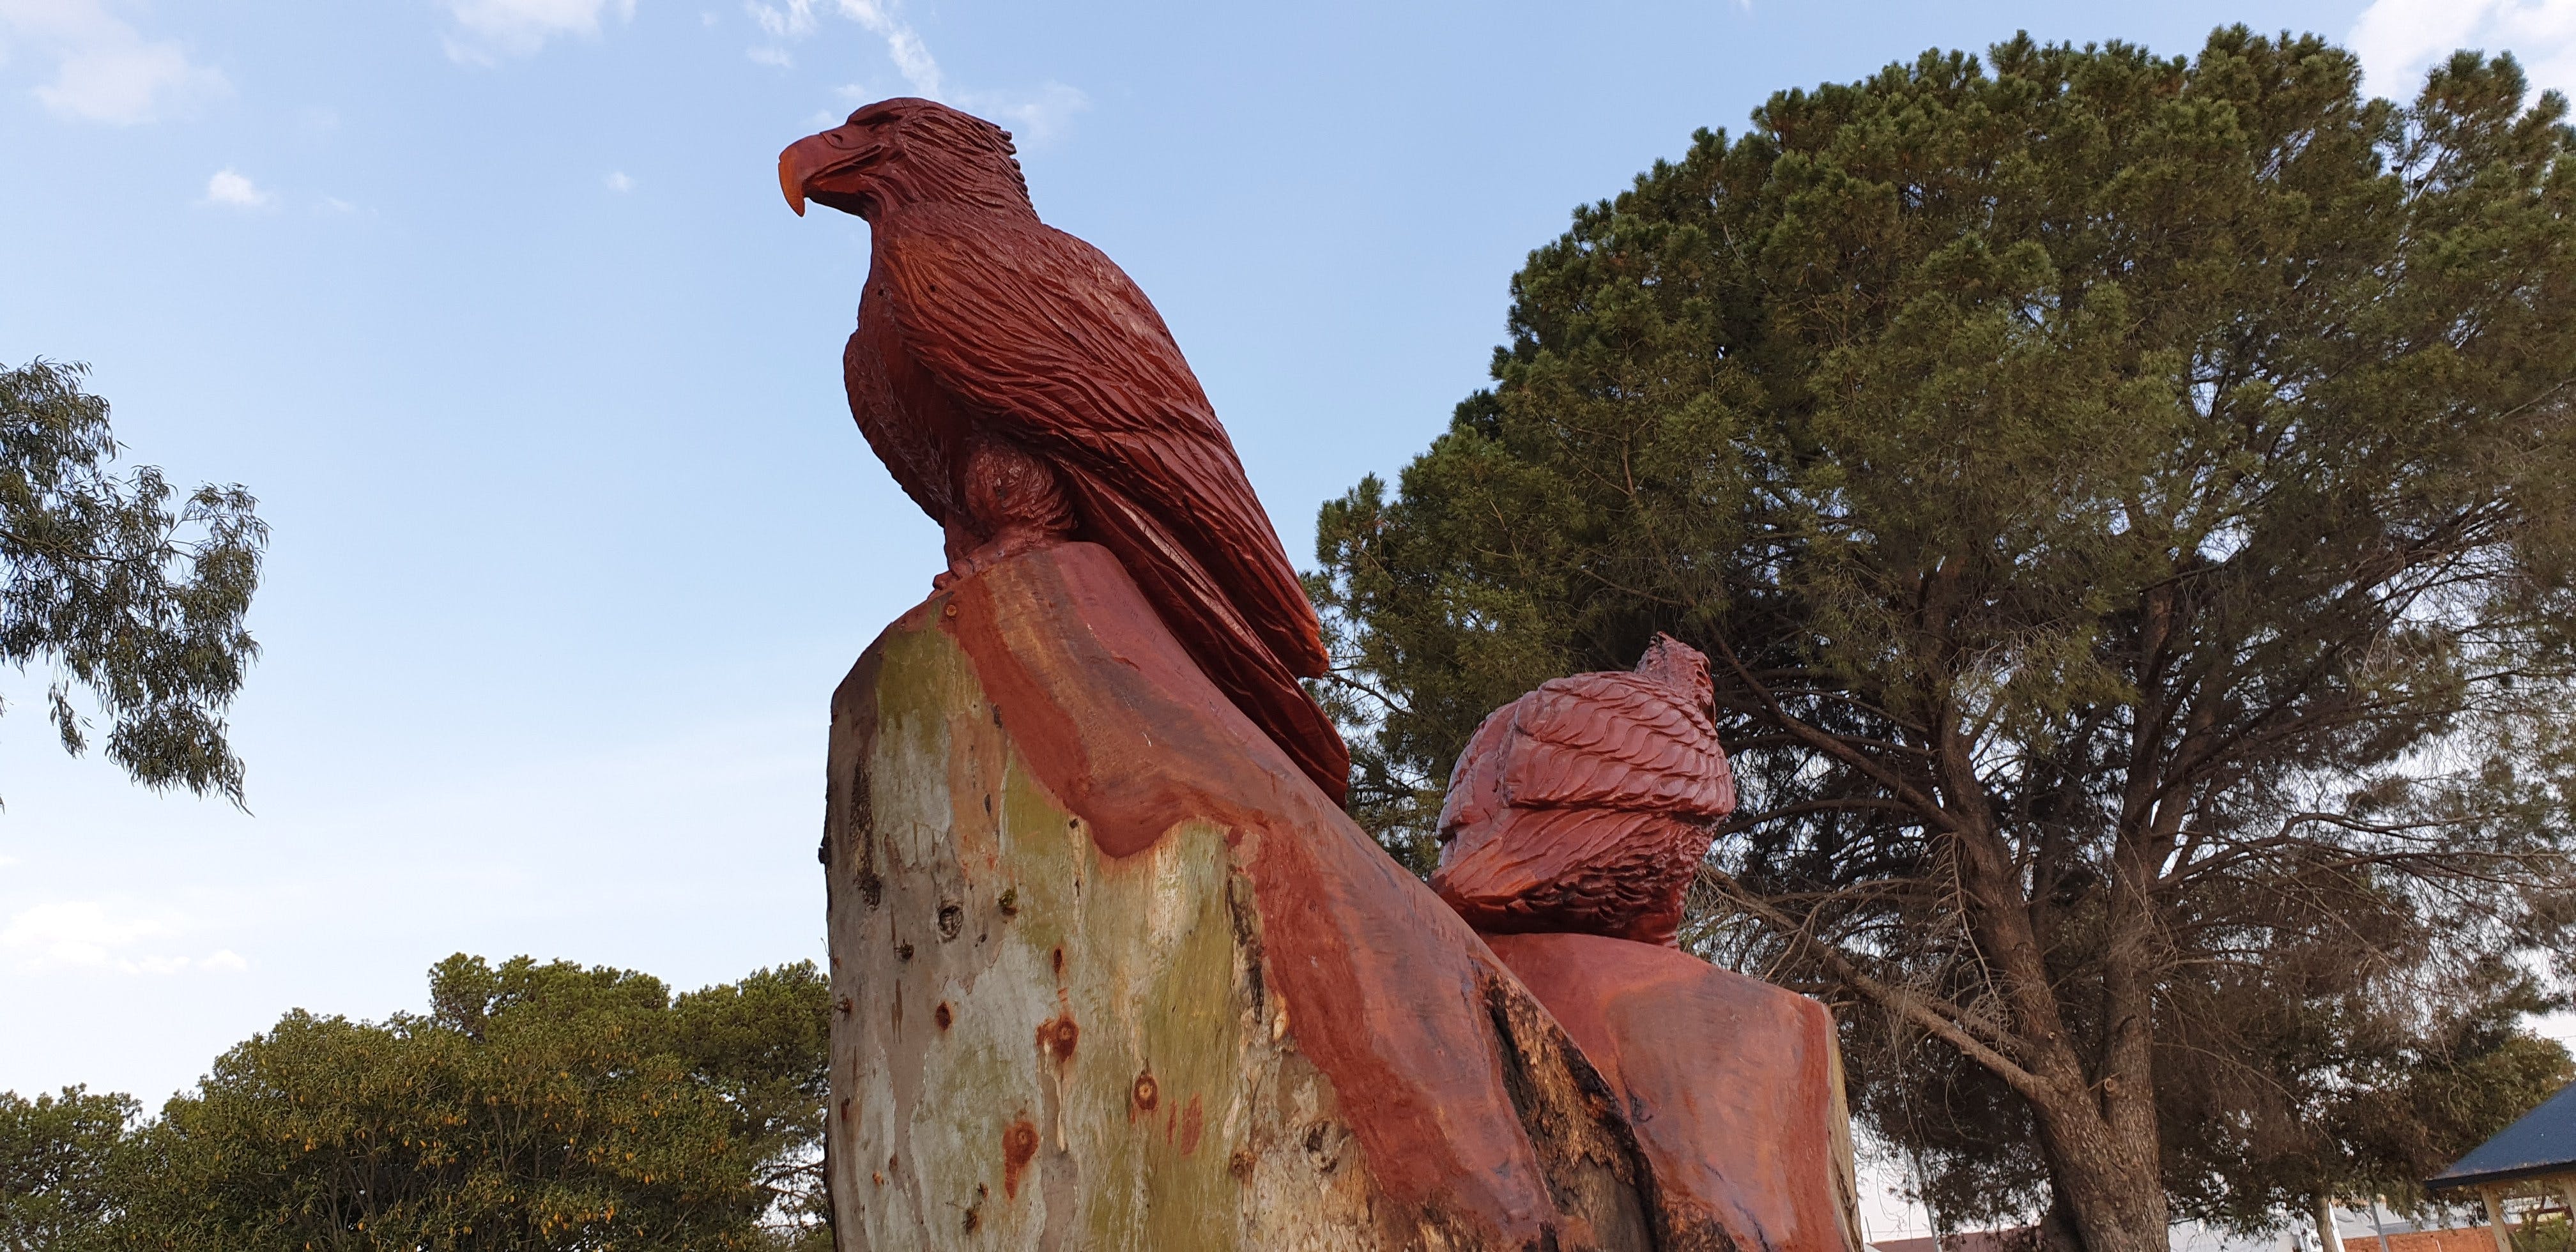 Chainsaw Tree Sculpture - Find Attractions